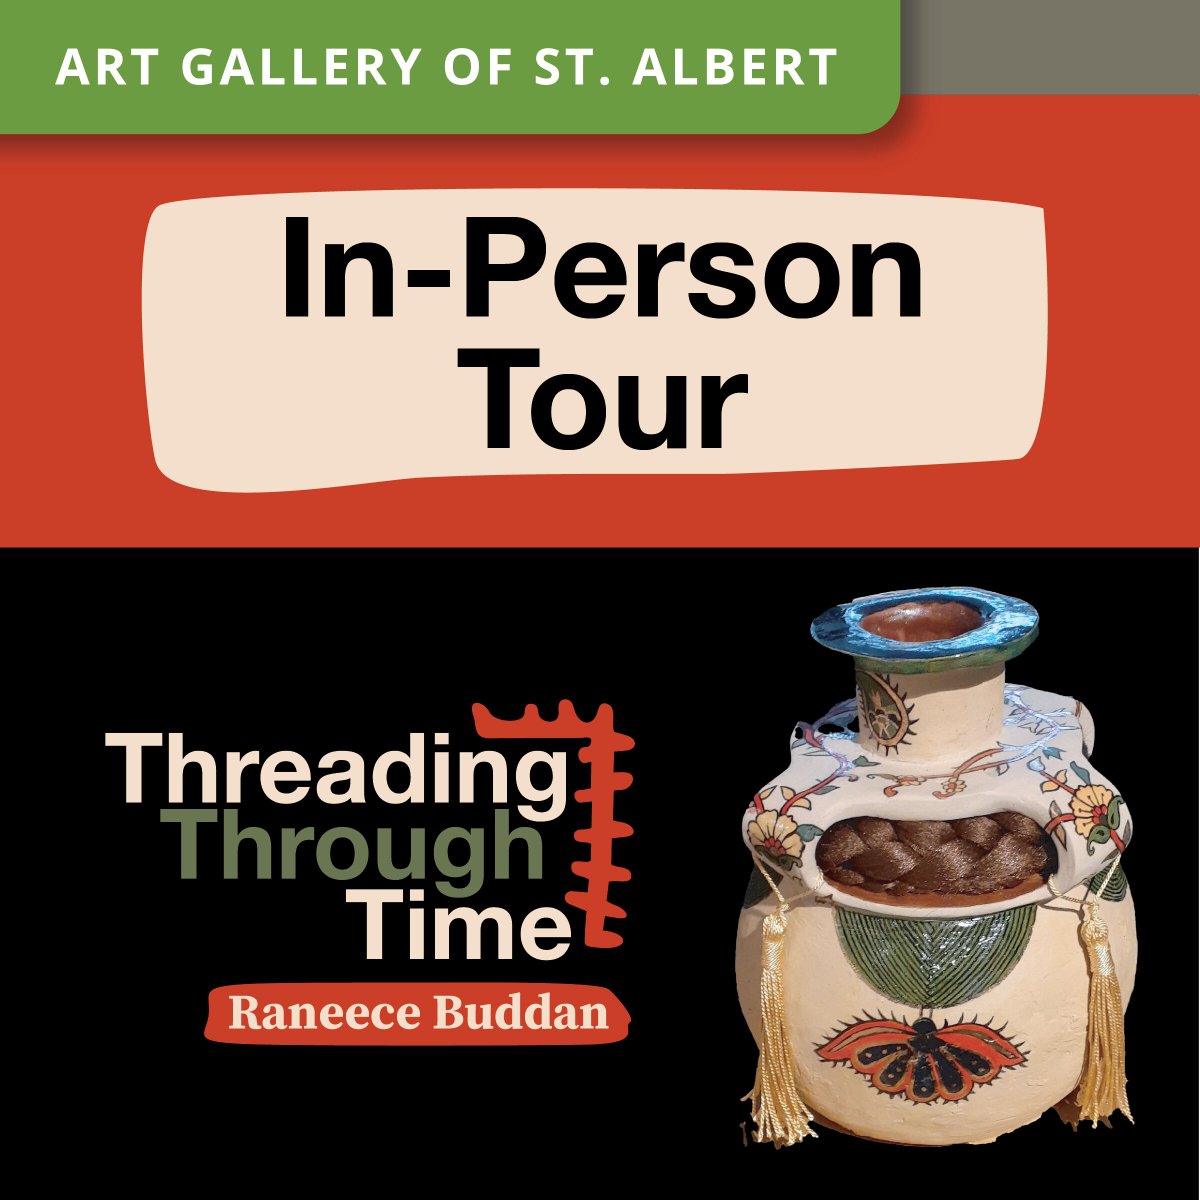 Join us tomorrow at noon for an in-person tour of Raneece Buddan's Threading Through Time. Our curator will encourage you to look closely and learn about the beautiful elements that inspired this work. Entry is free, and there is so much to learn! #art #tour #free #gallery